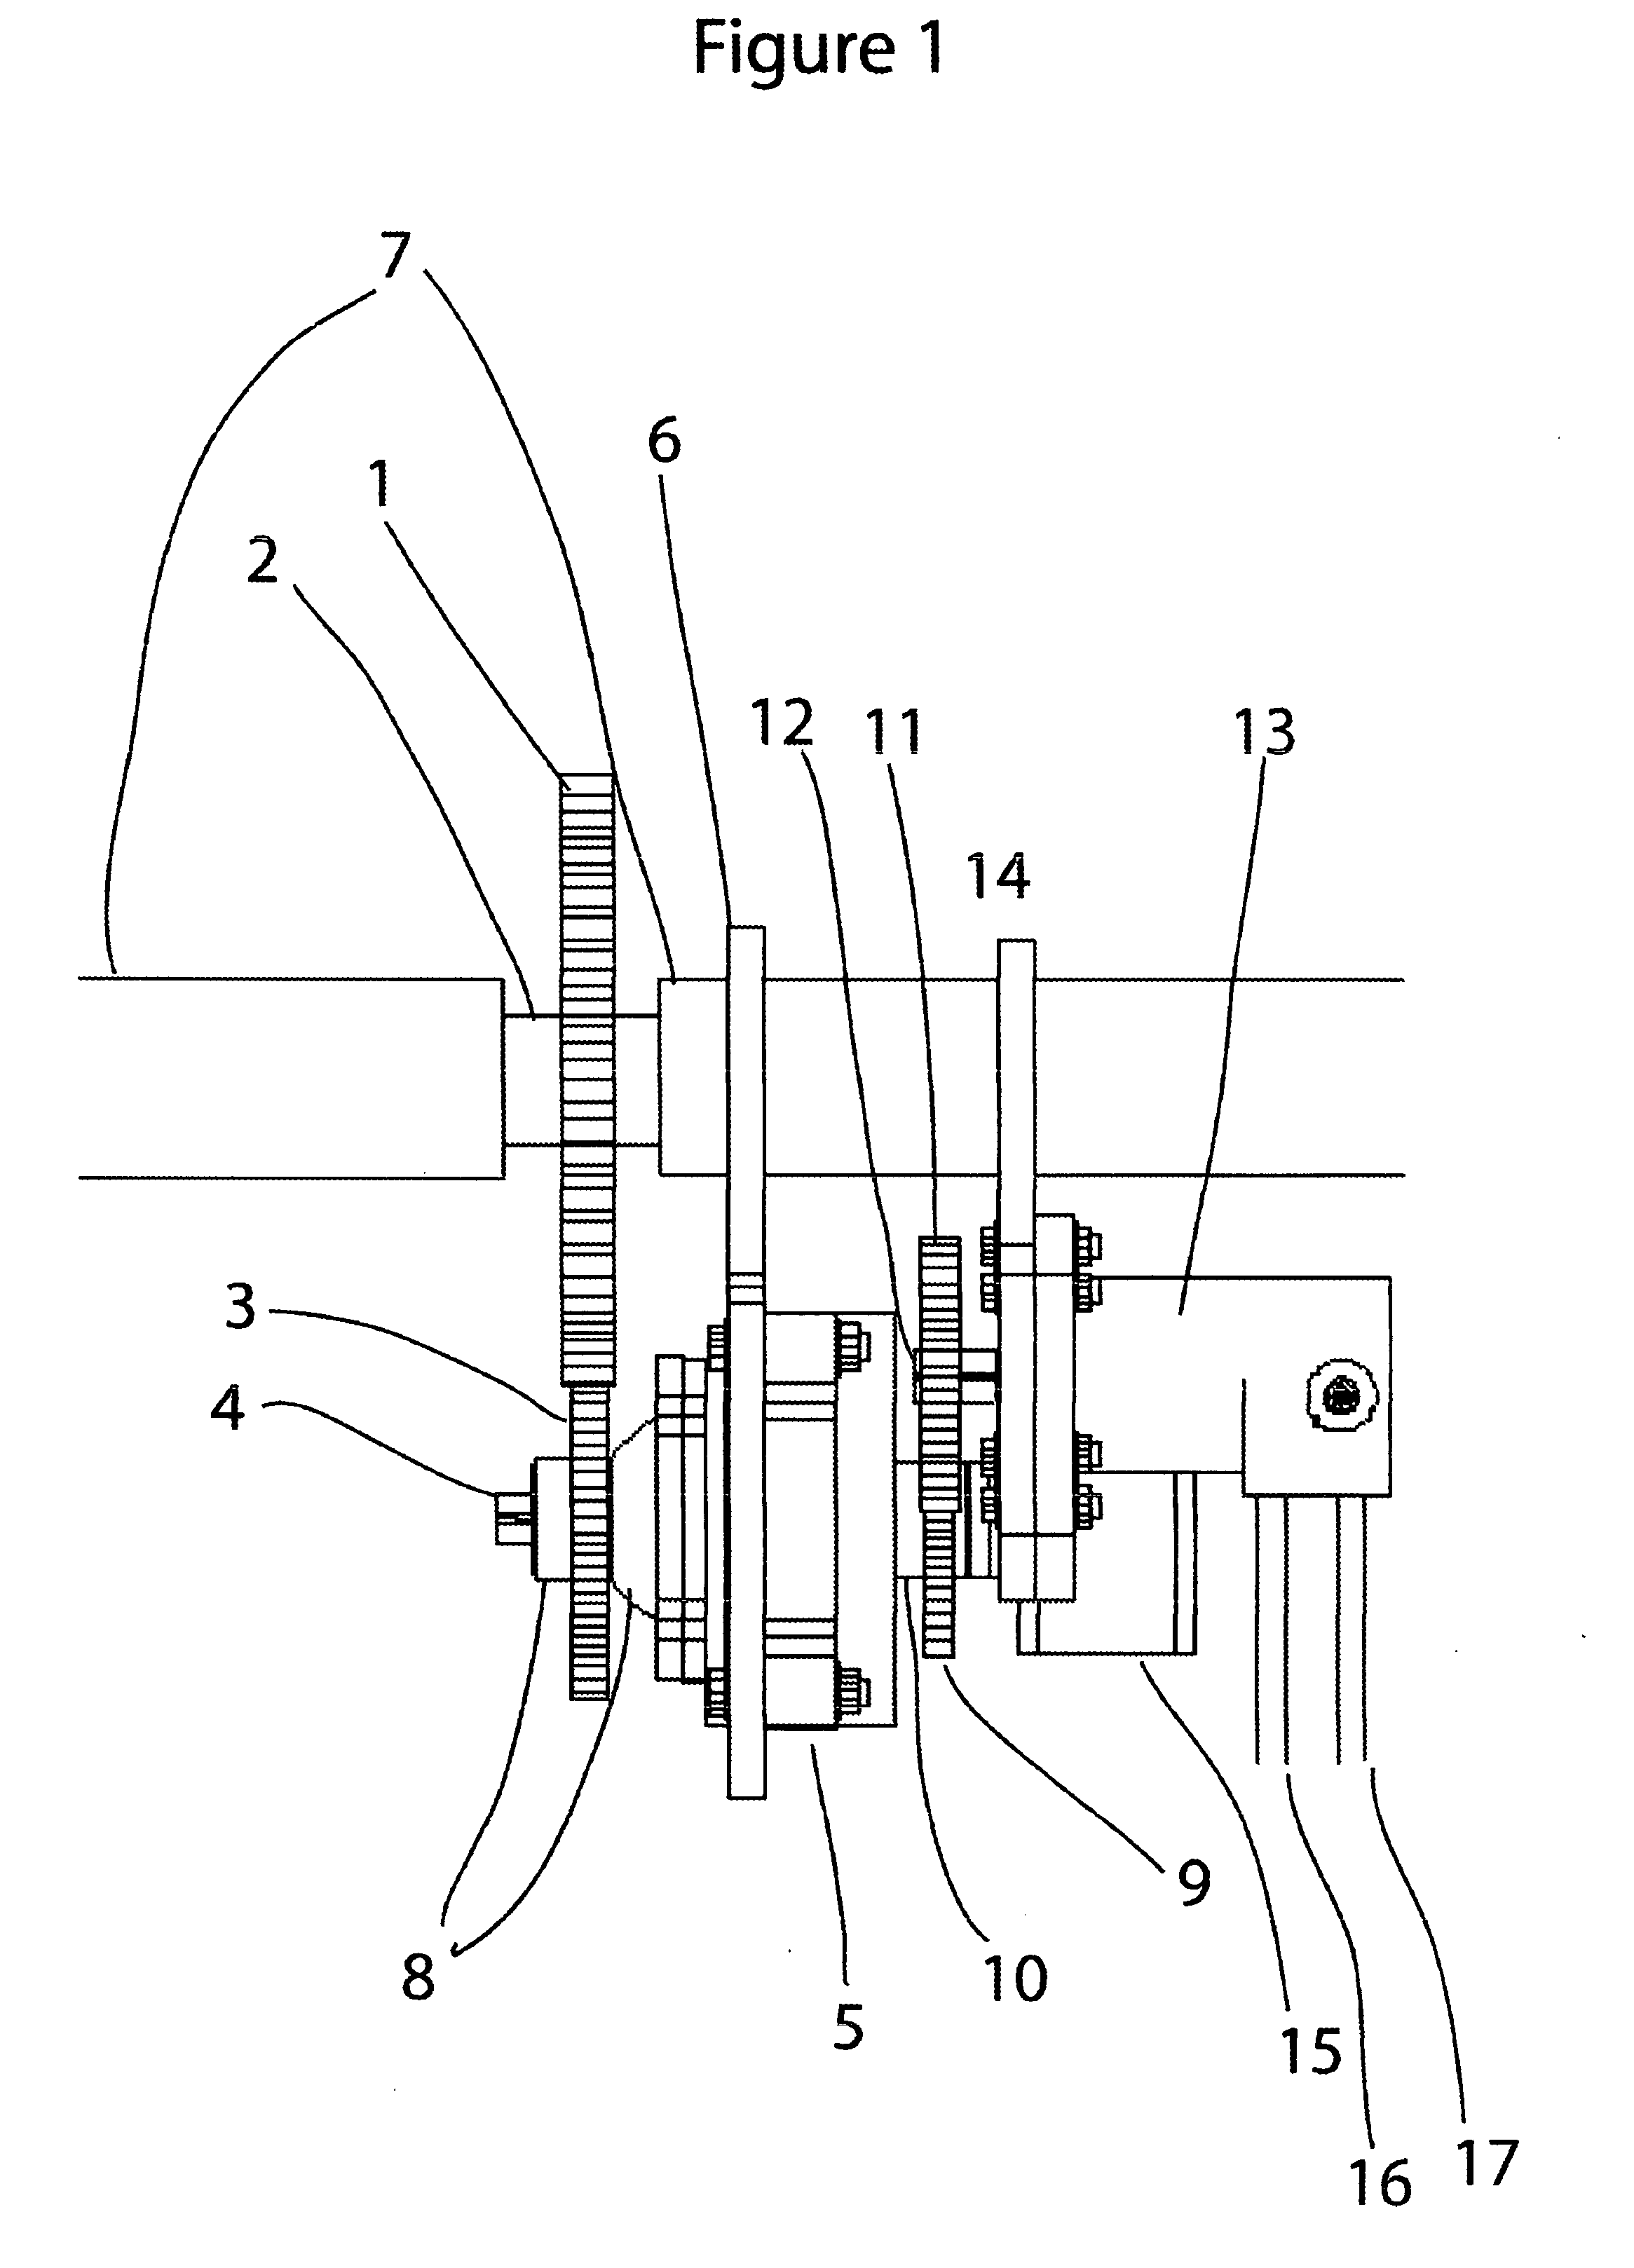 Hydraulic braking system that provides acceleration assistance and battery recharging